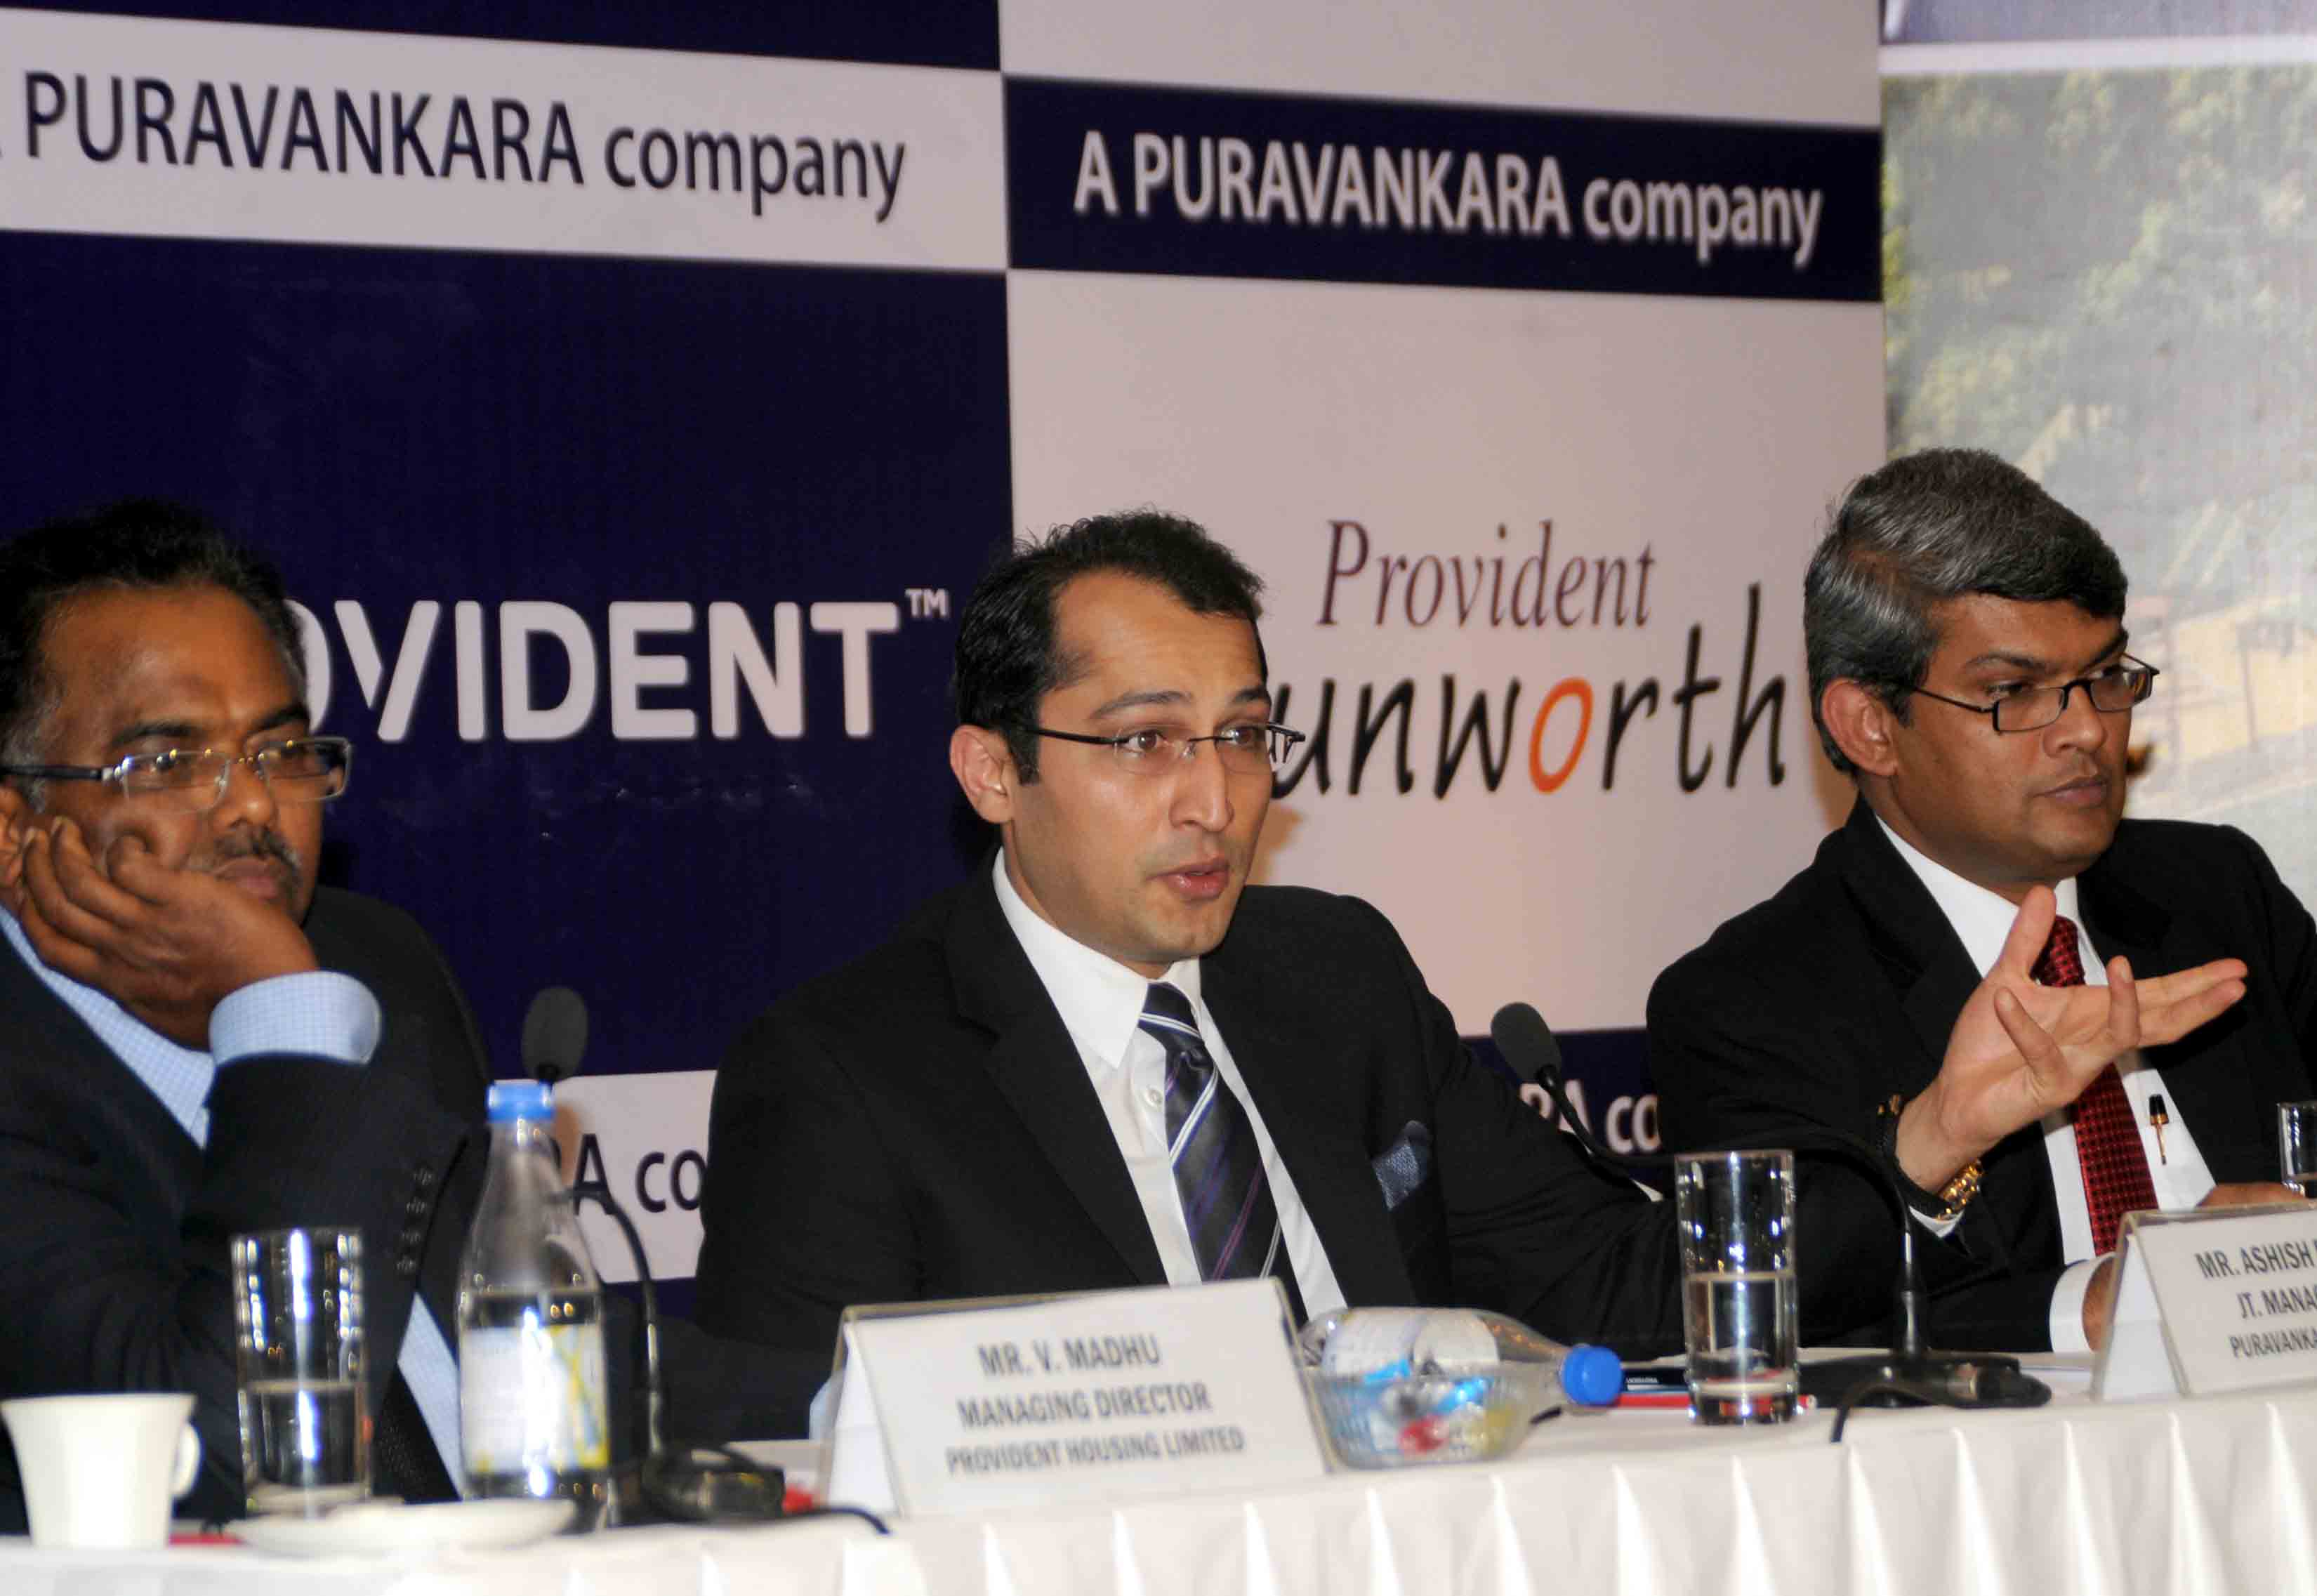 Purvankara Press Conference, India real estate news, Indian realty news, Property new, Home, Policy Advocacy, Activism, Mall, Retail, Office space, SEZ, IT/ITeS, Residential, Commercial, Hospitality, Project, Location, Regulation, FDI, Taxation, Investment, Banking, Property Management, Ravi Sinha, Track2Media, Track2Realty